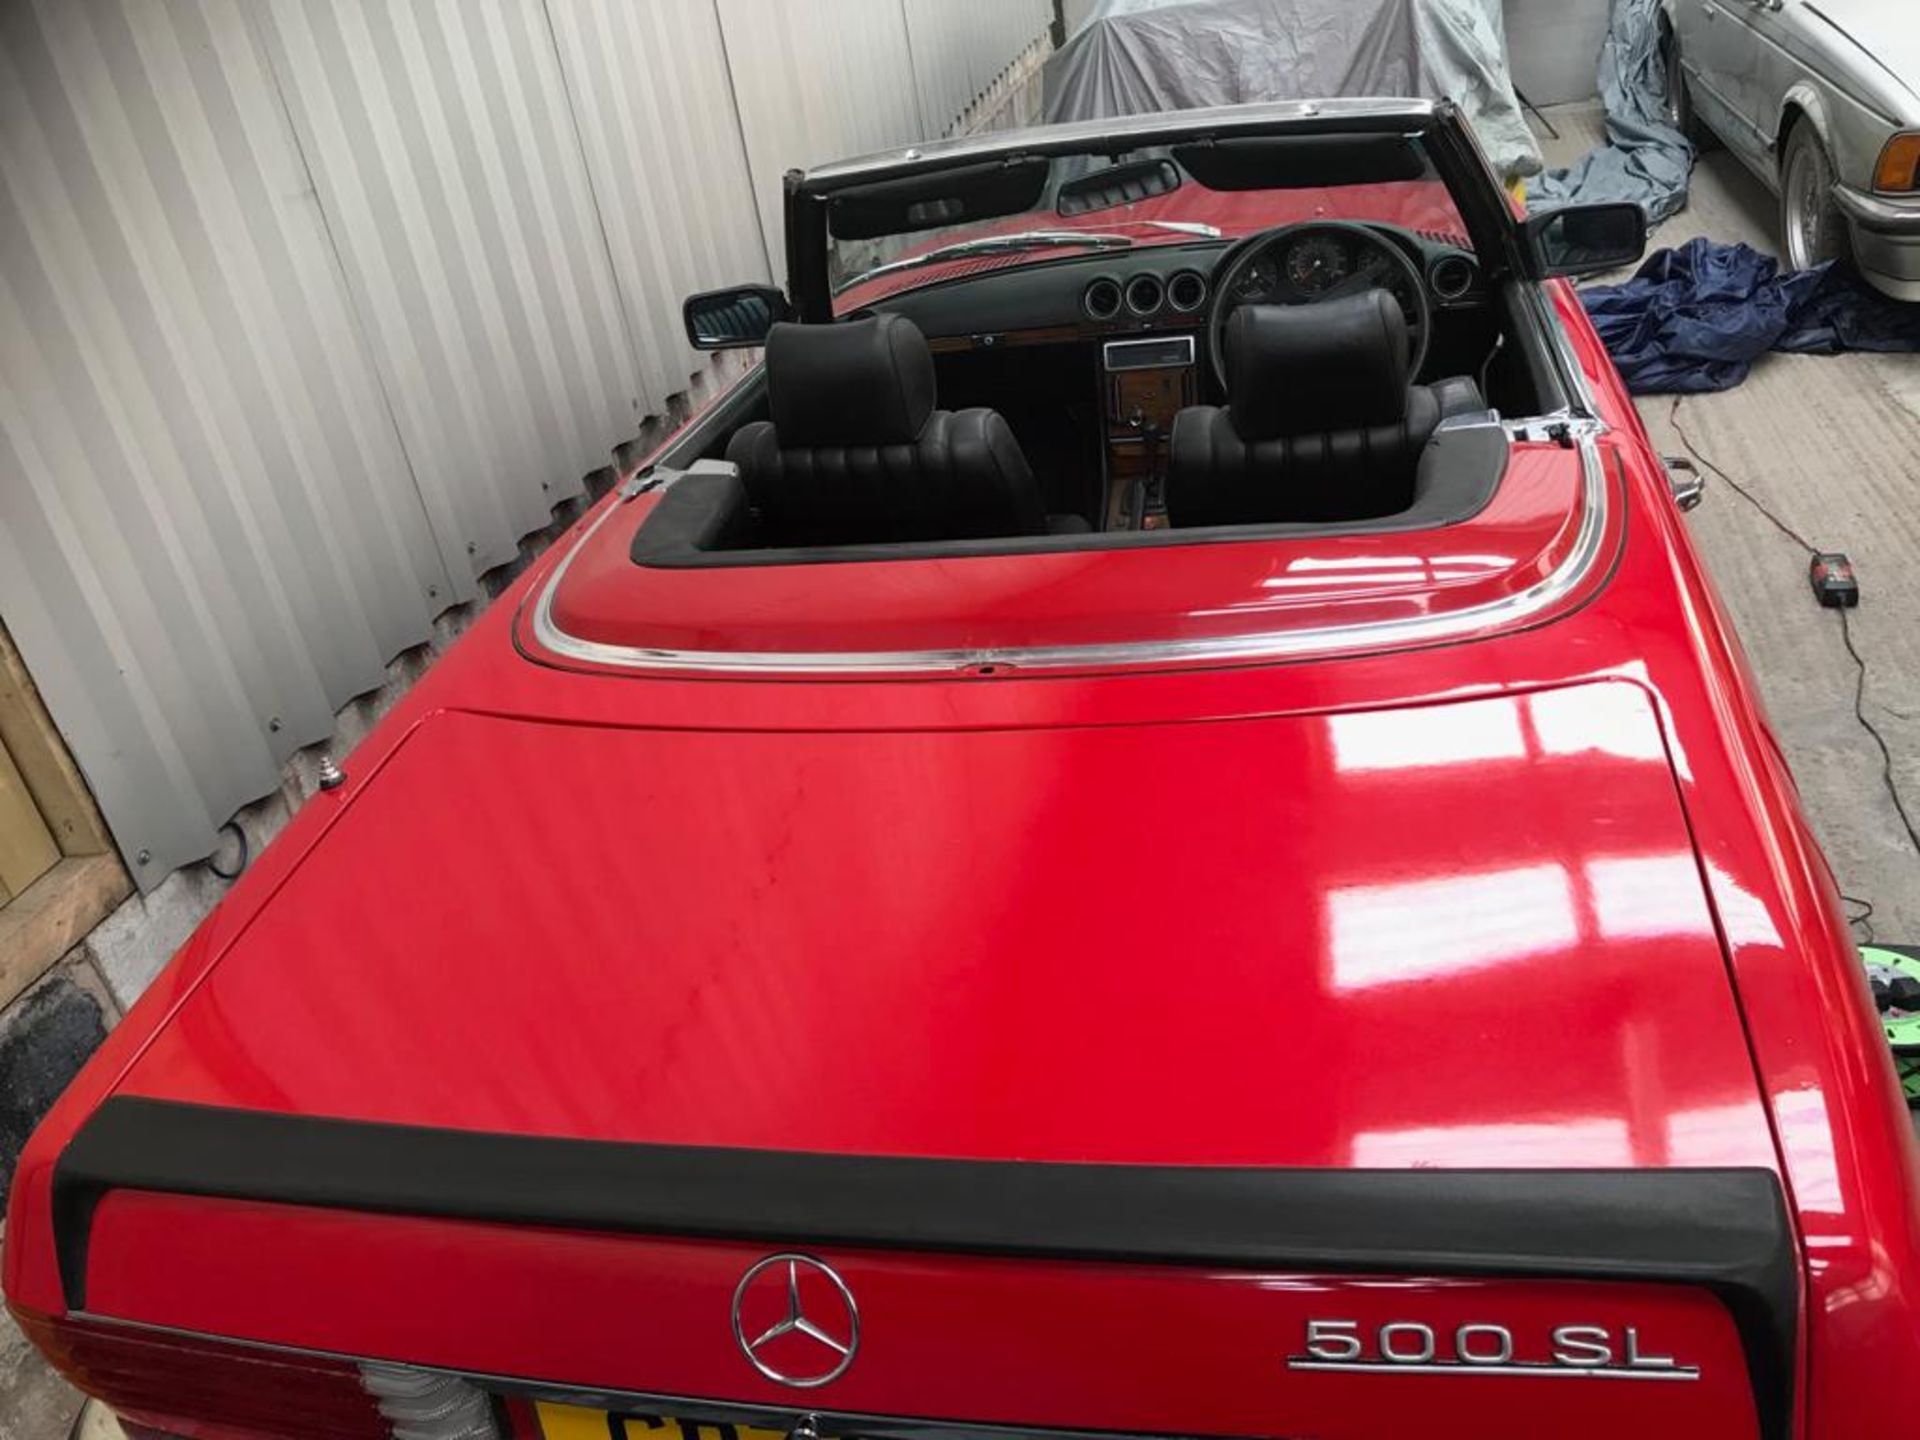 Mercedes 500SL R107 - 69,938 Miles - CL331 - Location: Manchester - No VAT on the hammer! This 500SL - Image 8 of 11